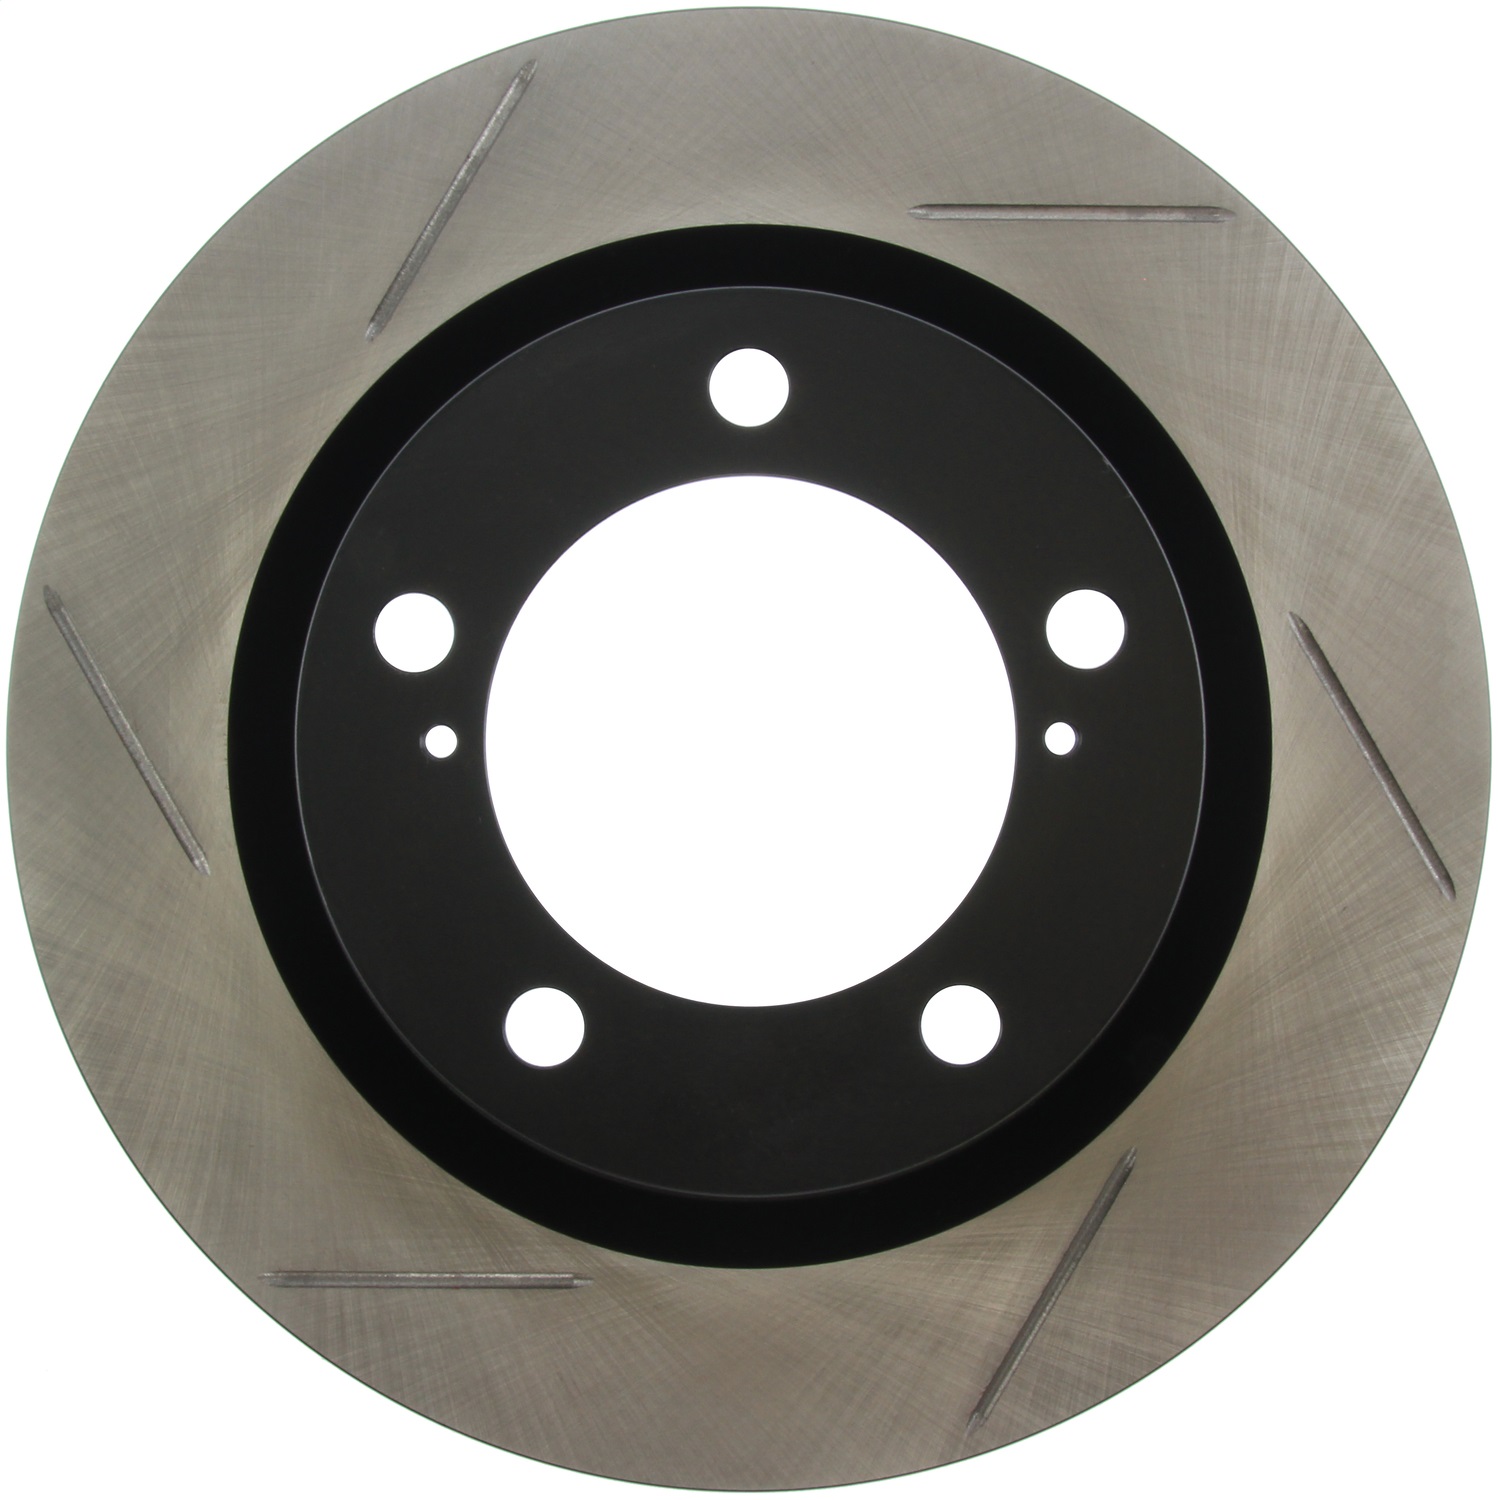 StopTech 126.44156SR Sport Slotted Disc Brake Rotor Fits LX570 Sequoia Tundra